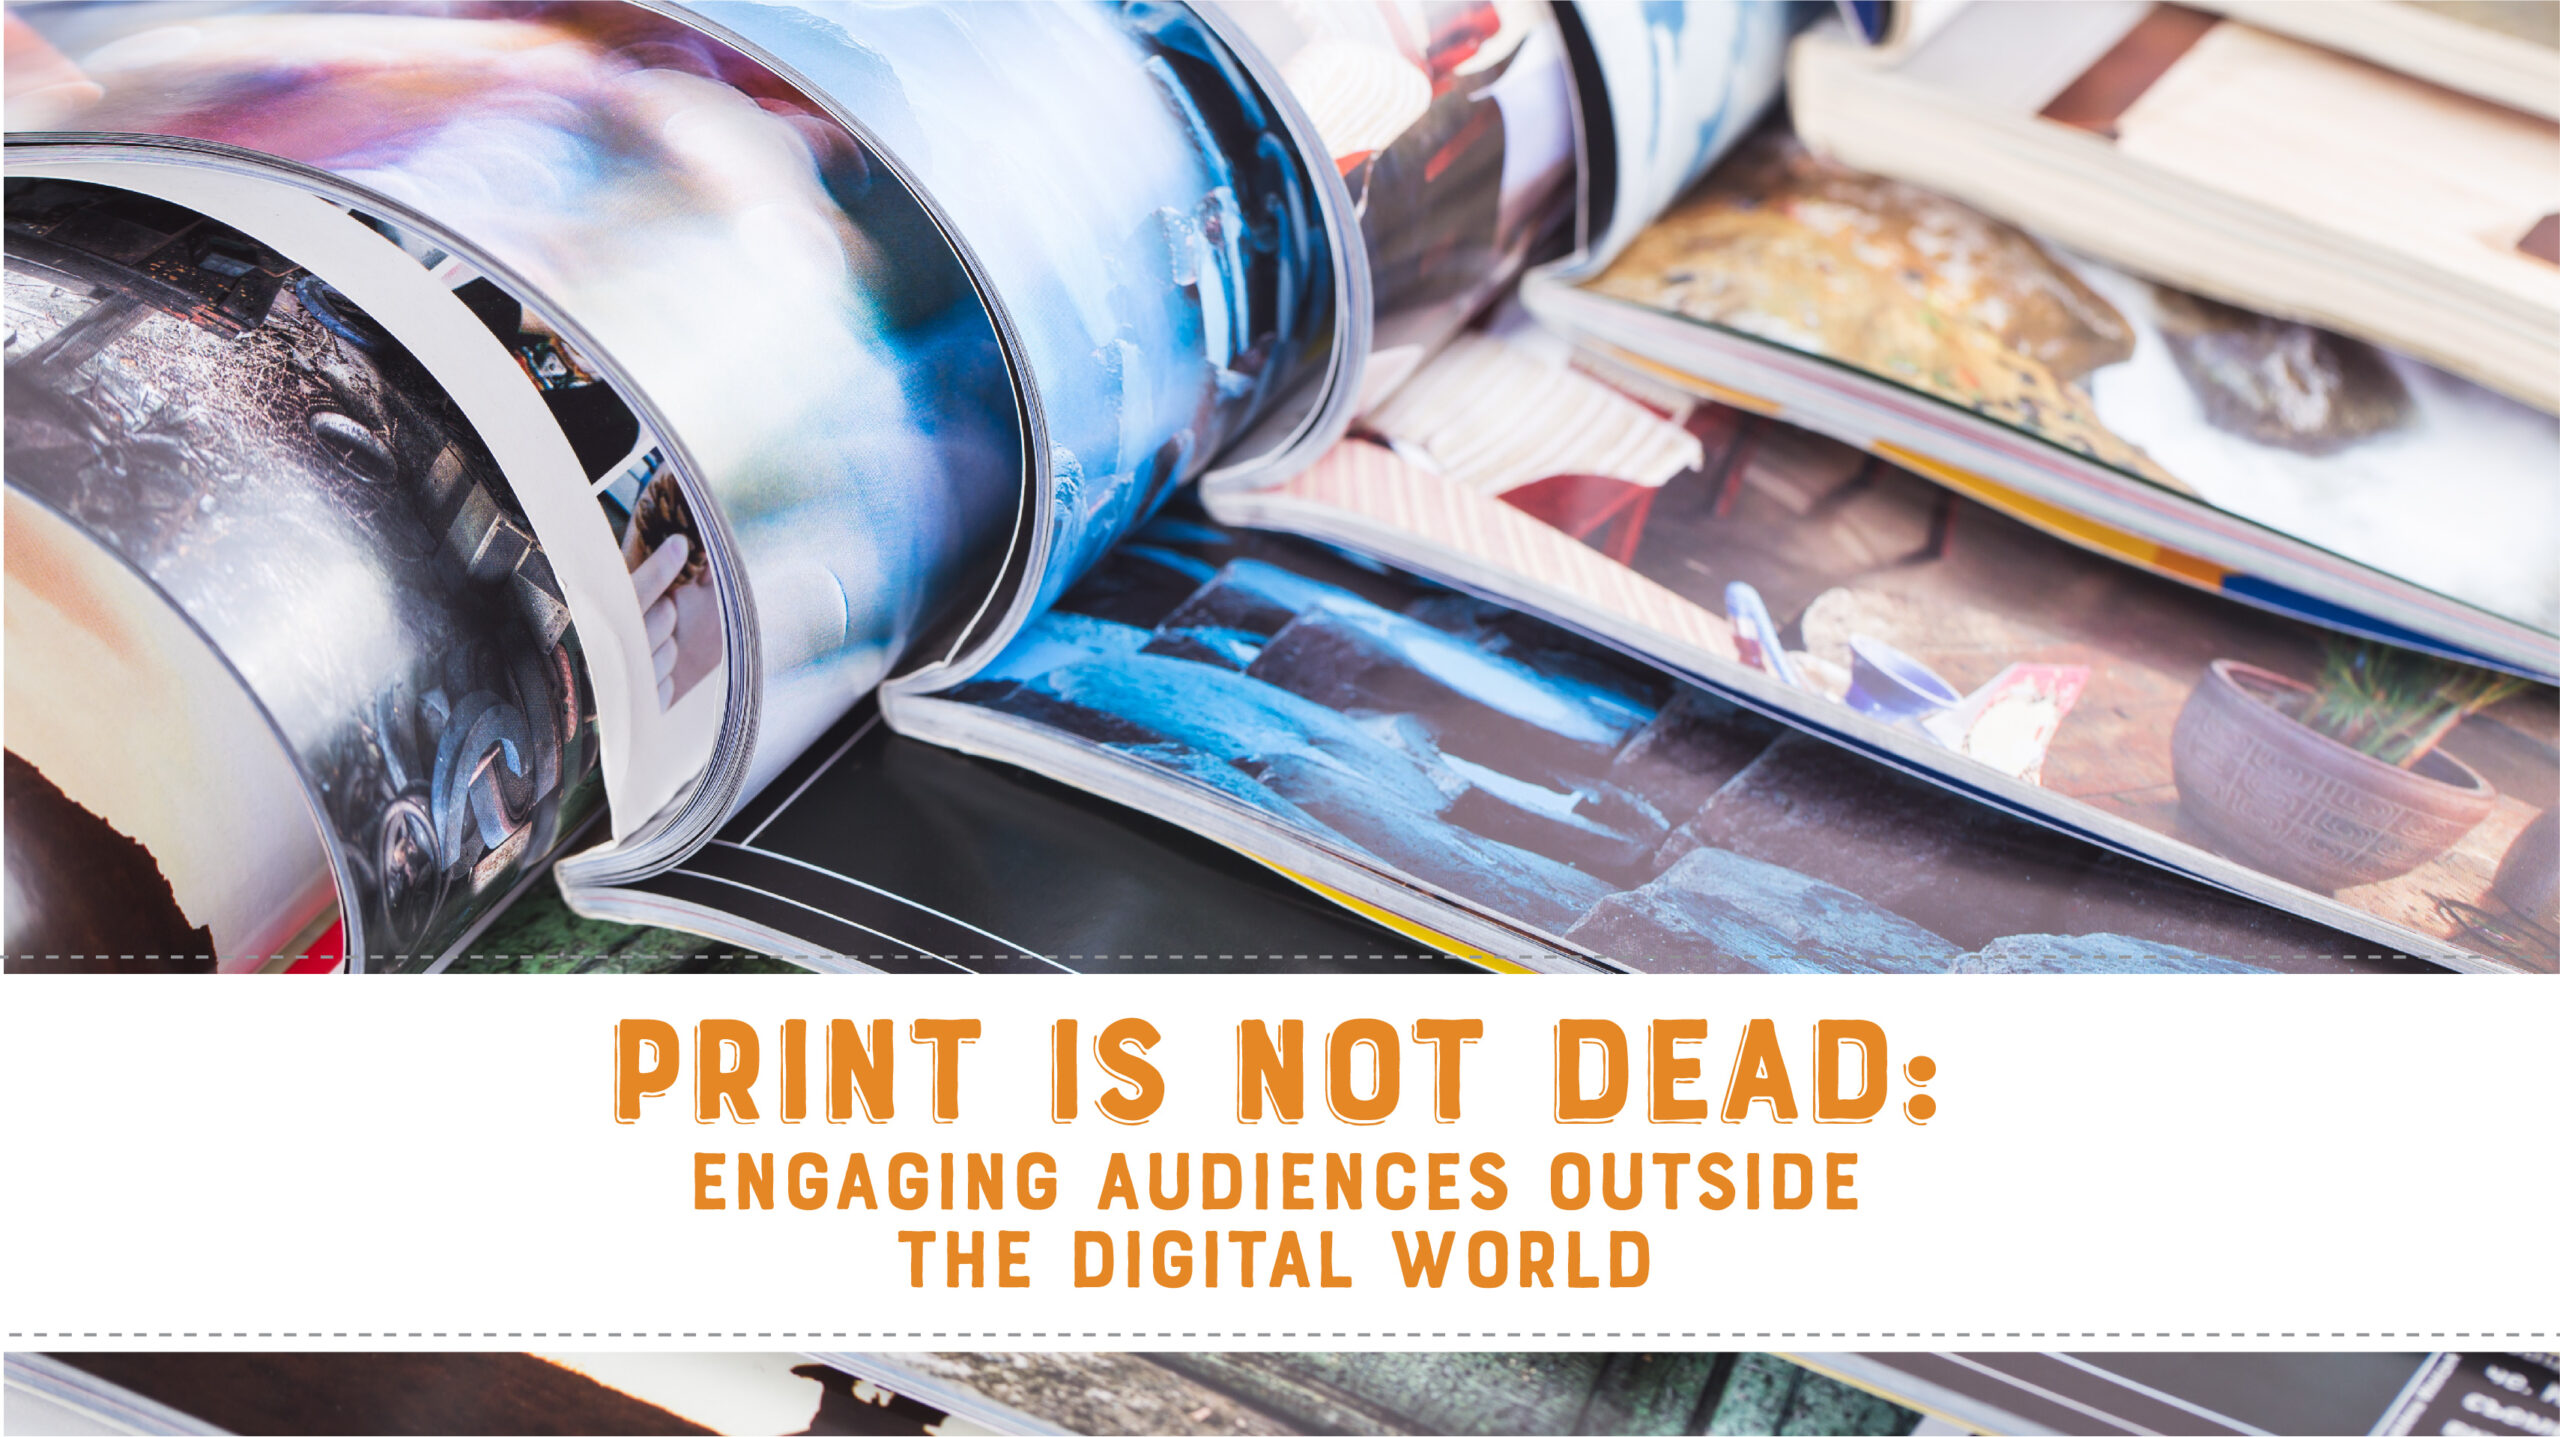 Print Is Not Dead: Engaging Audiences Outside the Digital World